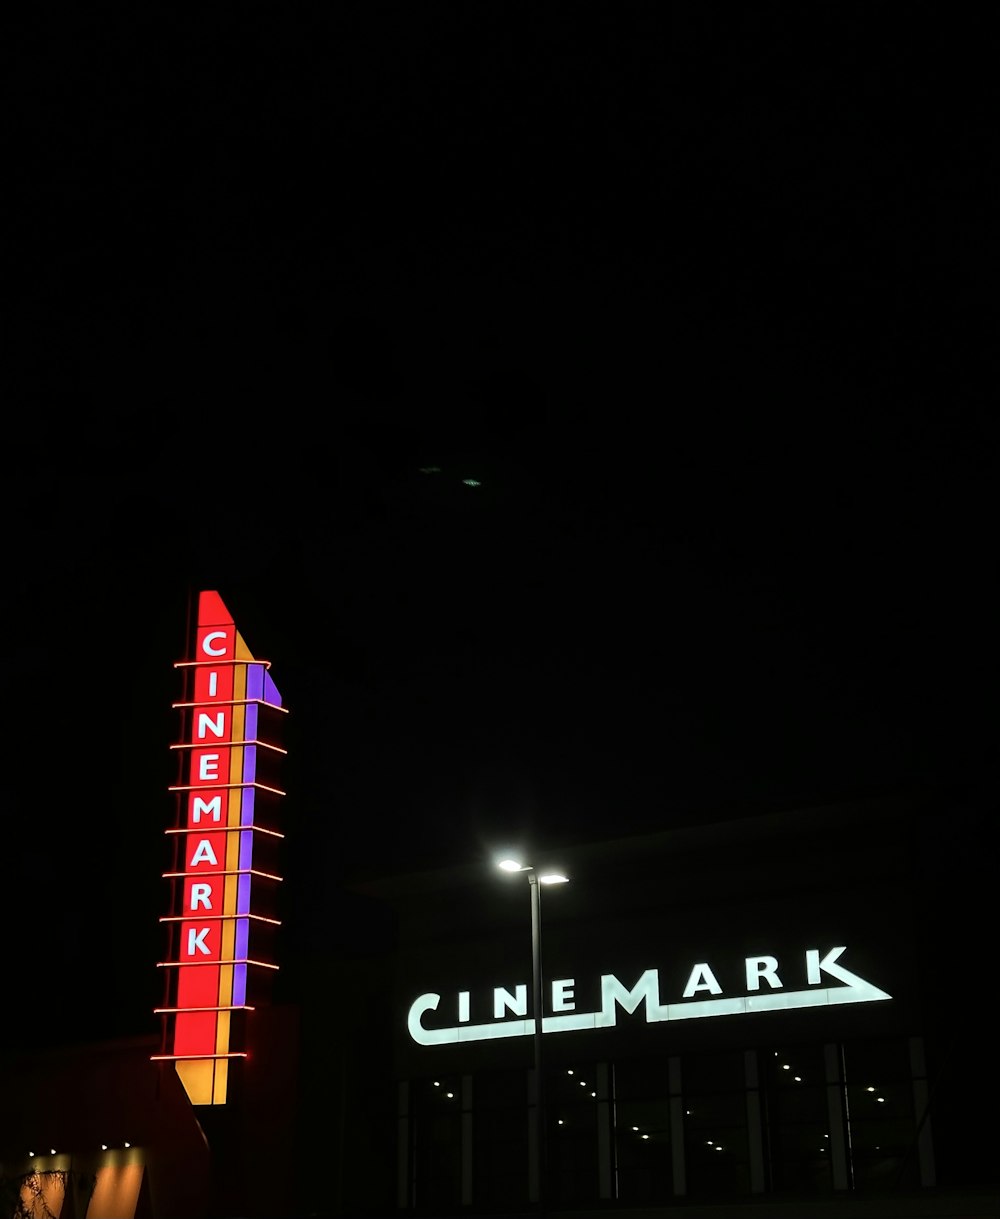 a large neon sign is lit up in the dark